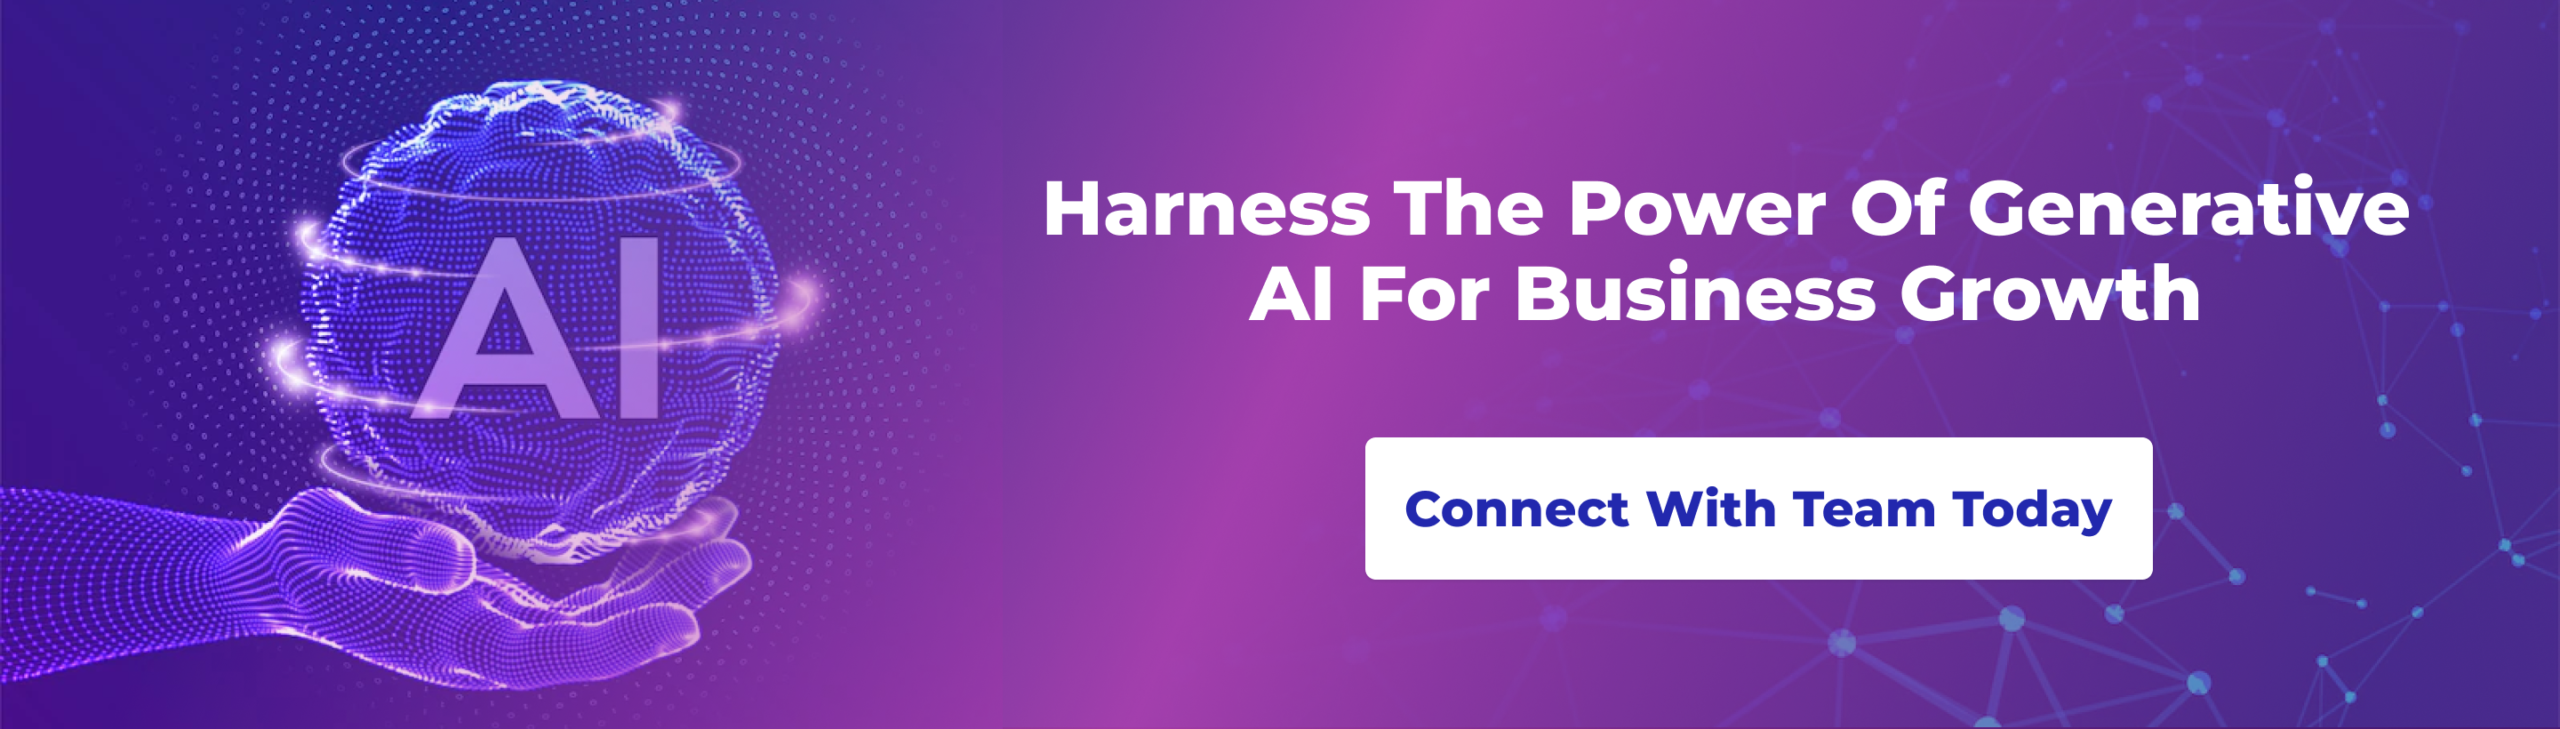 Harness The Power Of Generative AI For Business Growth